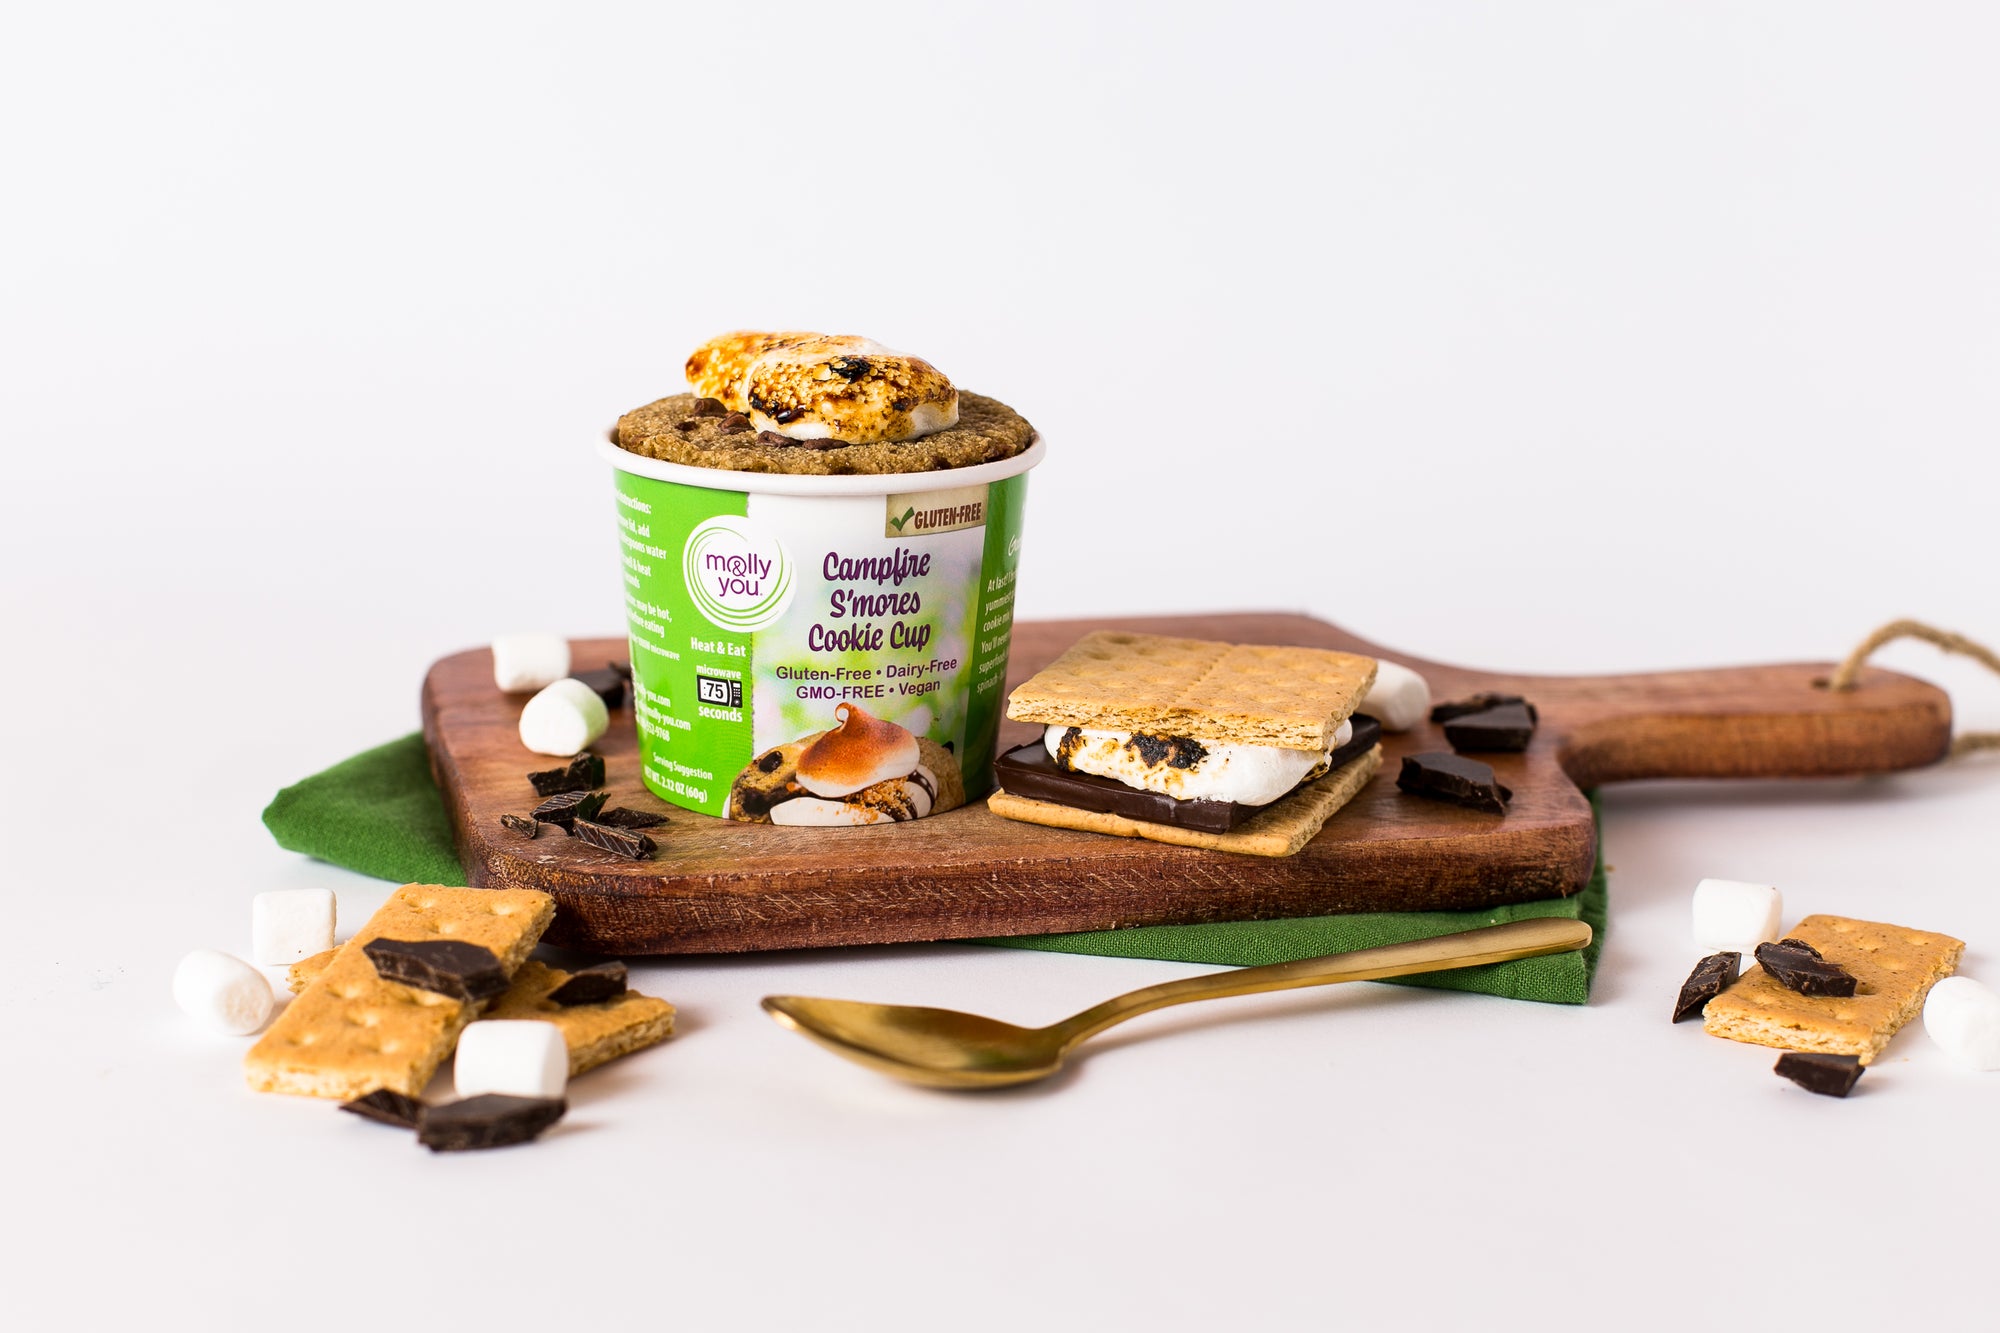 Gluten-Free Campfire S'mores Cookie Cup 3-Pack.